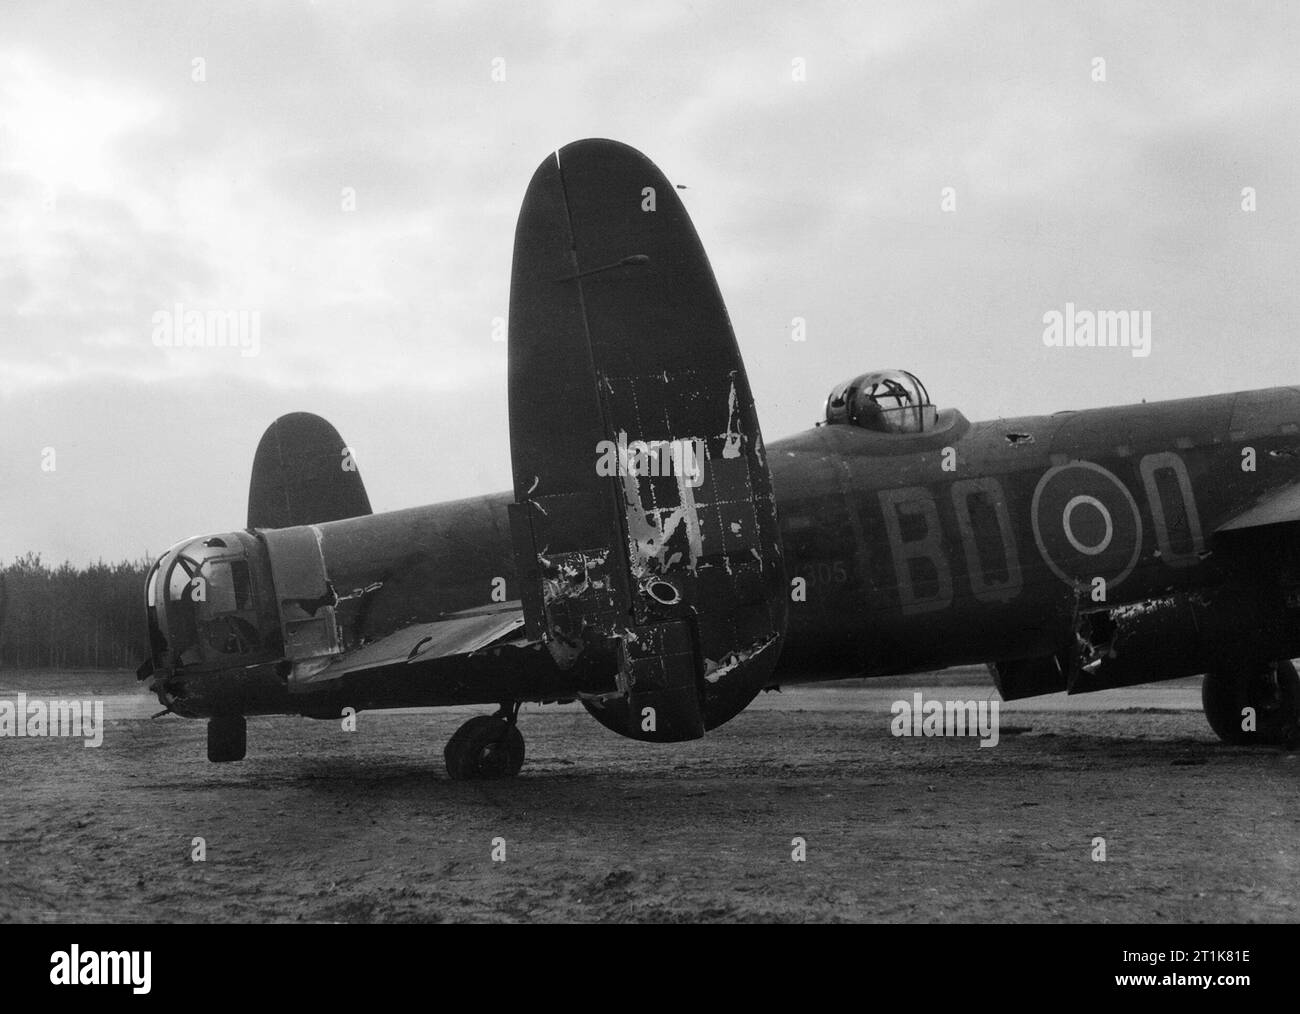 Royal Air Force Bomber Command, 1942-1945. The rear section of Avro Lancaster B Mark I, DV305 'BQ-O', No. 550 Squadron RAF based at North Killingholme, Lincolnshire, seen at Woodbridge Emergency Landing Ground, Suffolk, after the severely-damaged aircraft crash-landed there following an attack by a German night fighter over Berlin on the night of 30/31 January 1944. In the course of the attack both the rear gunner and the mid-upper gunner were killed, and the bomb-aimer baled out having misunderstood orders. The pilot, Flying Officer G A Morrison, managed to bring the crippled aircraft back wi Stock Photo